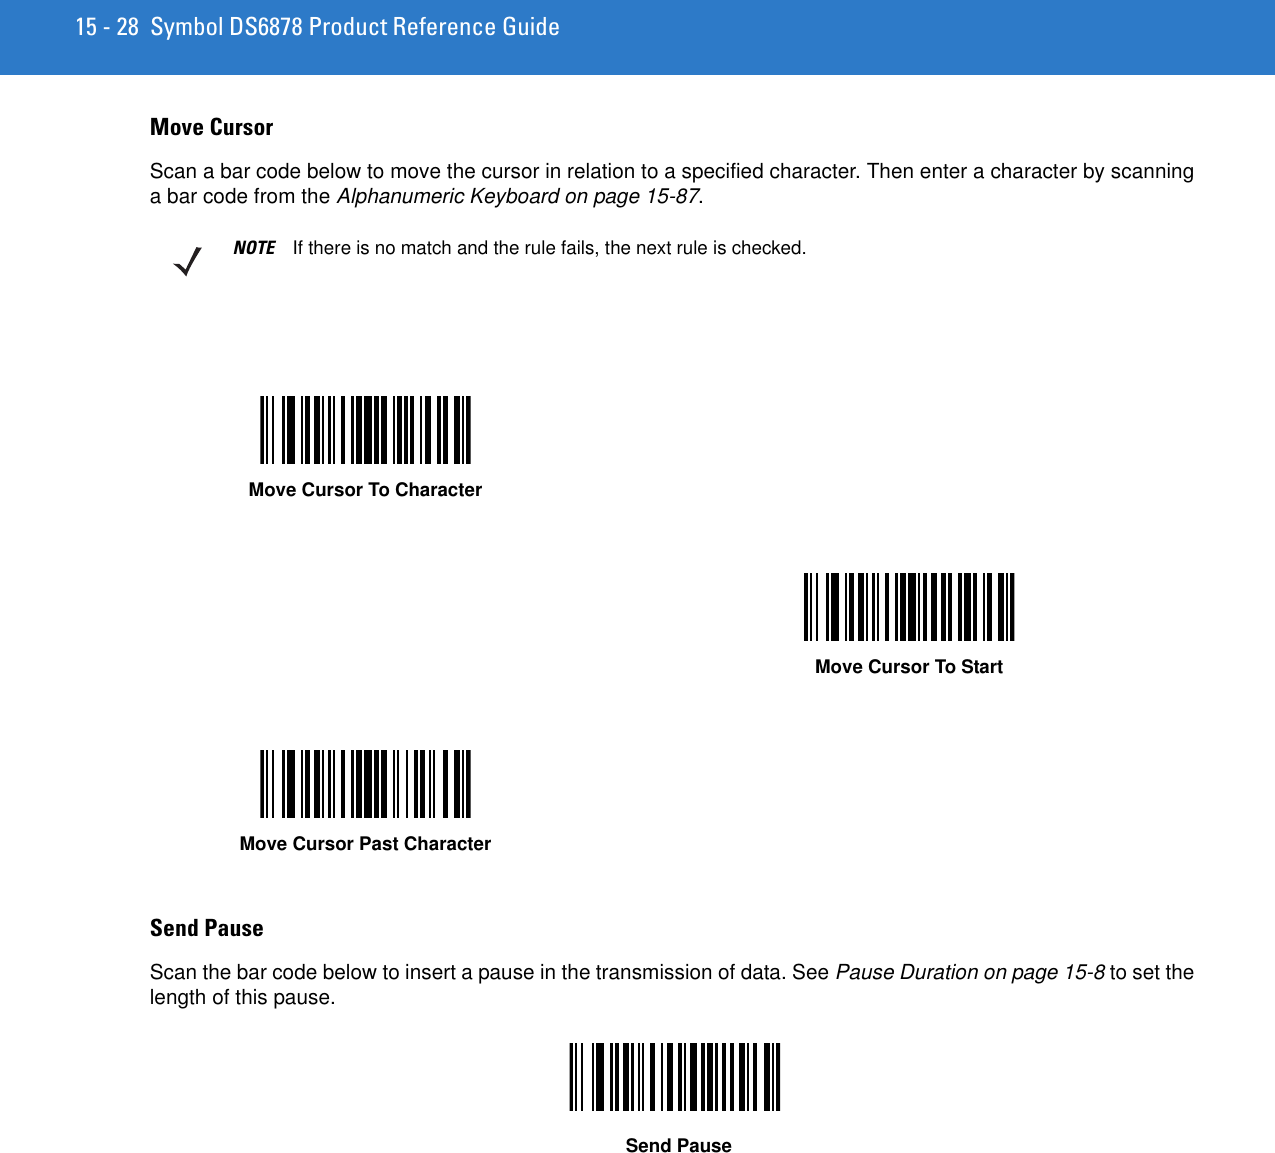 15 - 28 Symbol DS6878 Product Reference GuideMove CursorScan a bar code below to move the cursor in relation to a specified character. Then enter a character by scanning a bar code from the Alphanumeric Keyboard on page 15-87.Send PauseScan the bar code below to insert a pause in the transmission of data. See Pause Duration on page 15-8 to set the length of this pause.NOTE If there is no match and the rule fails, the next rule is checked.Move Cursor To CharacterMove Cursor To StartMove Cursor Past CharacterSend Pause